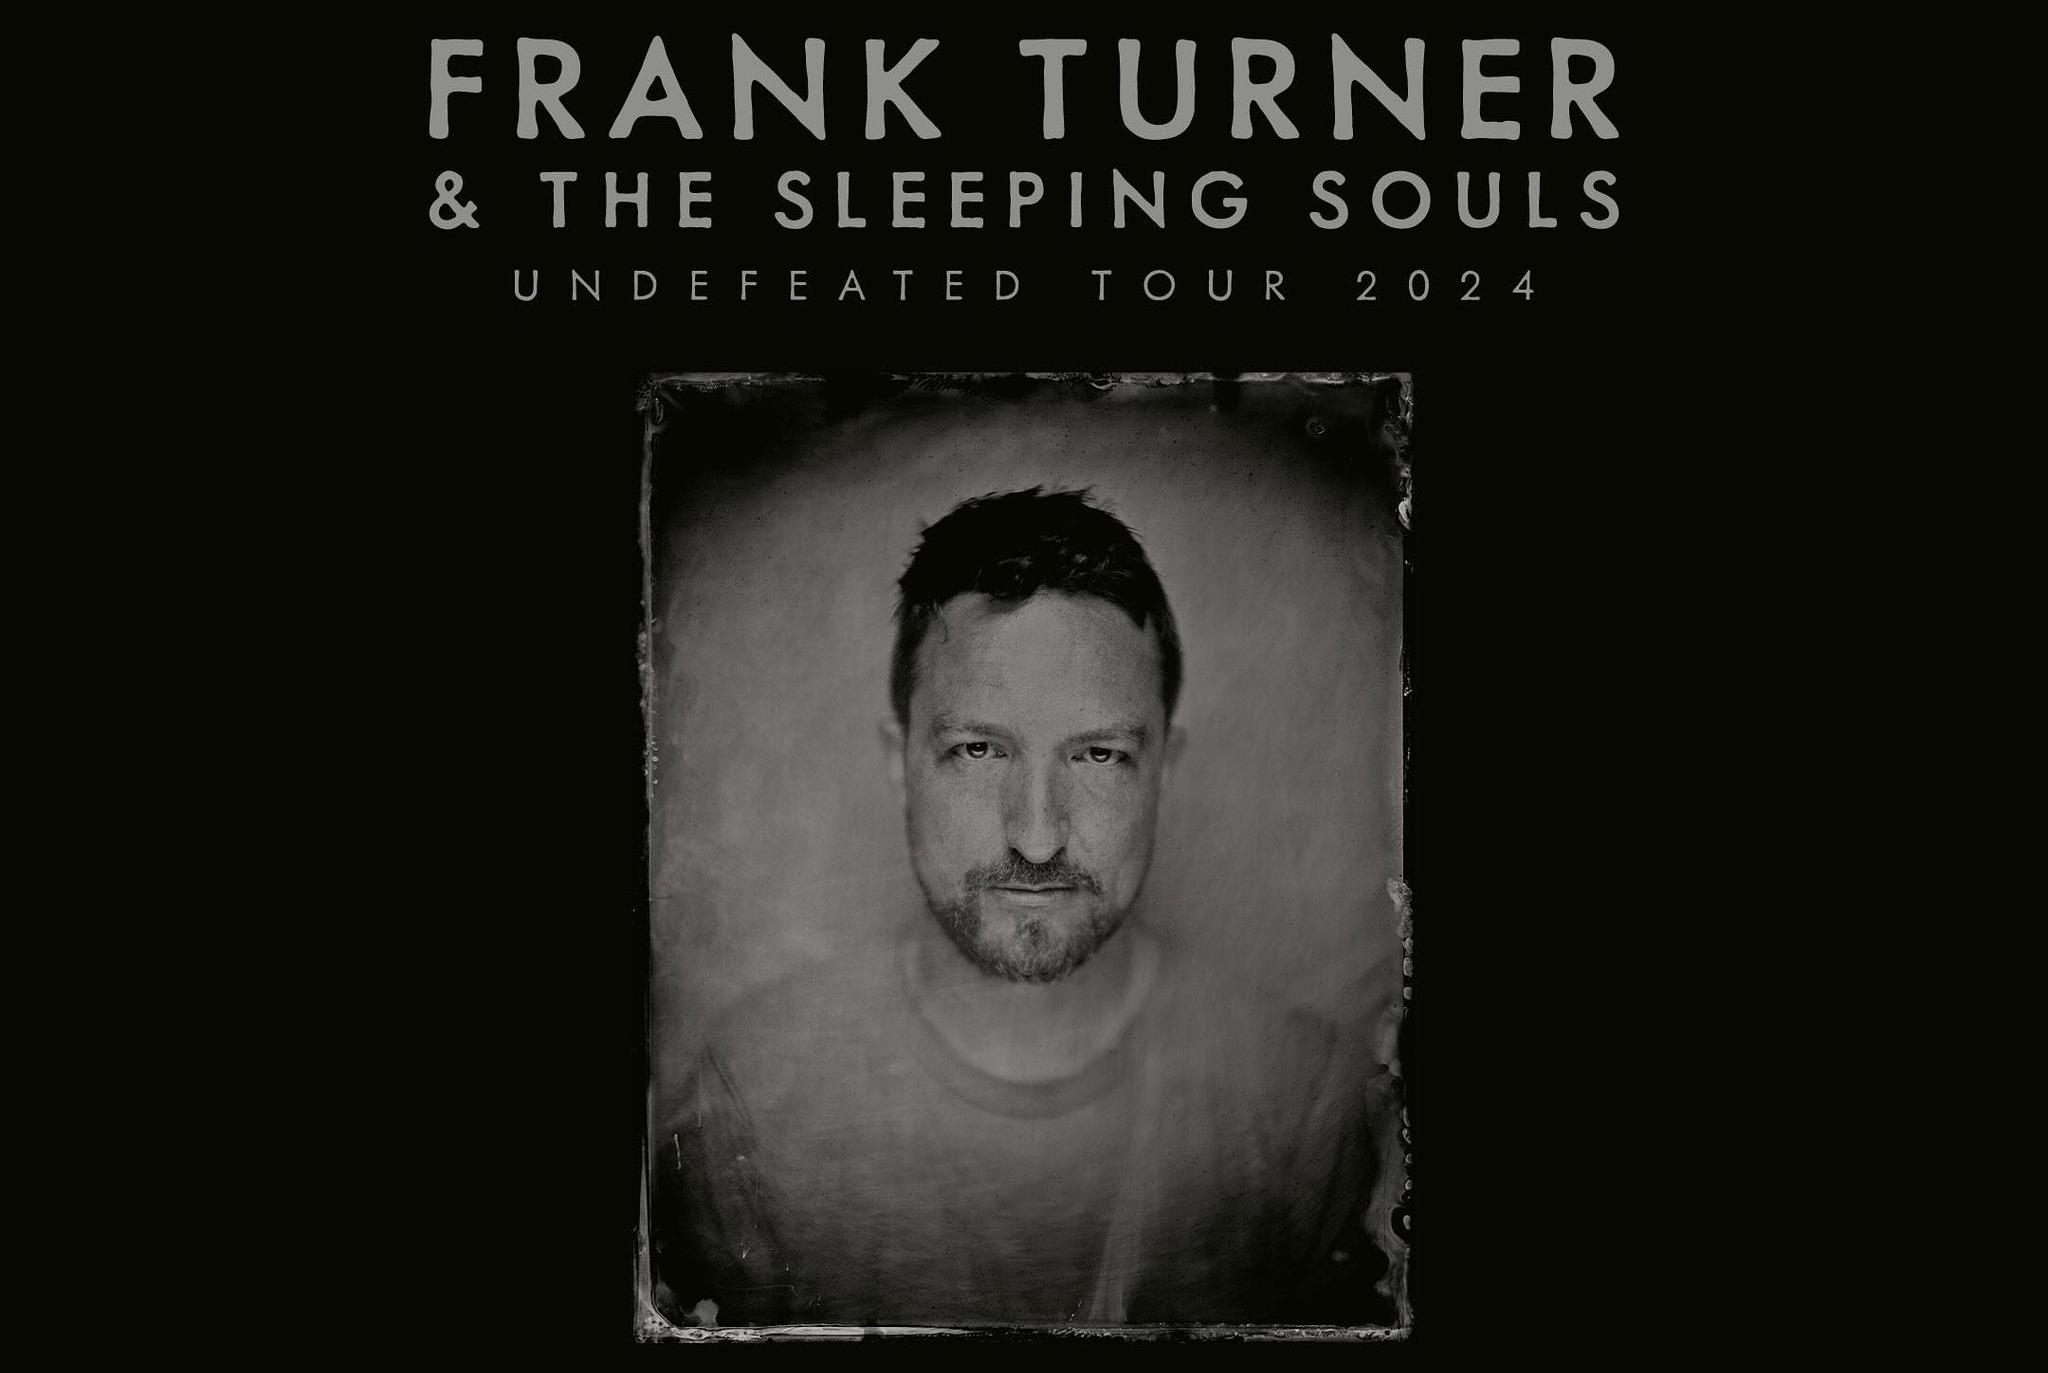 Frank Turner and The Sleeping Souls in der Turbinenhalle Oberhausen Tickets